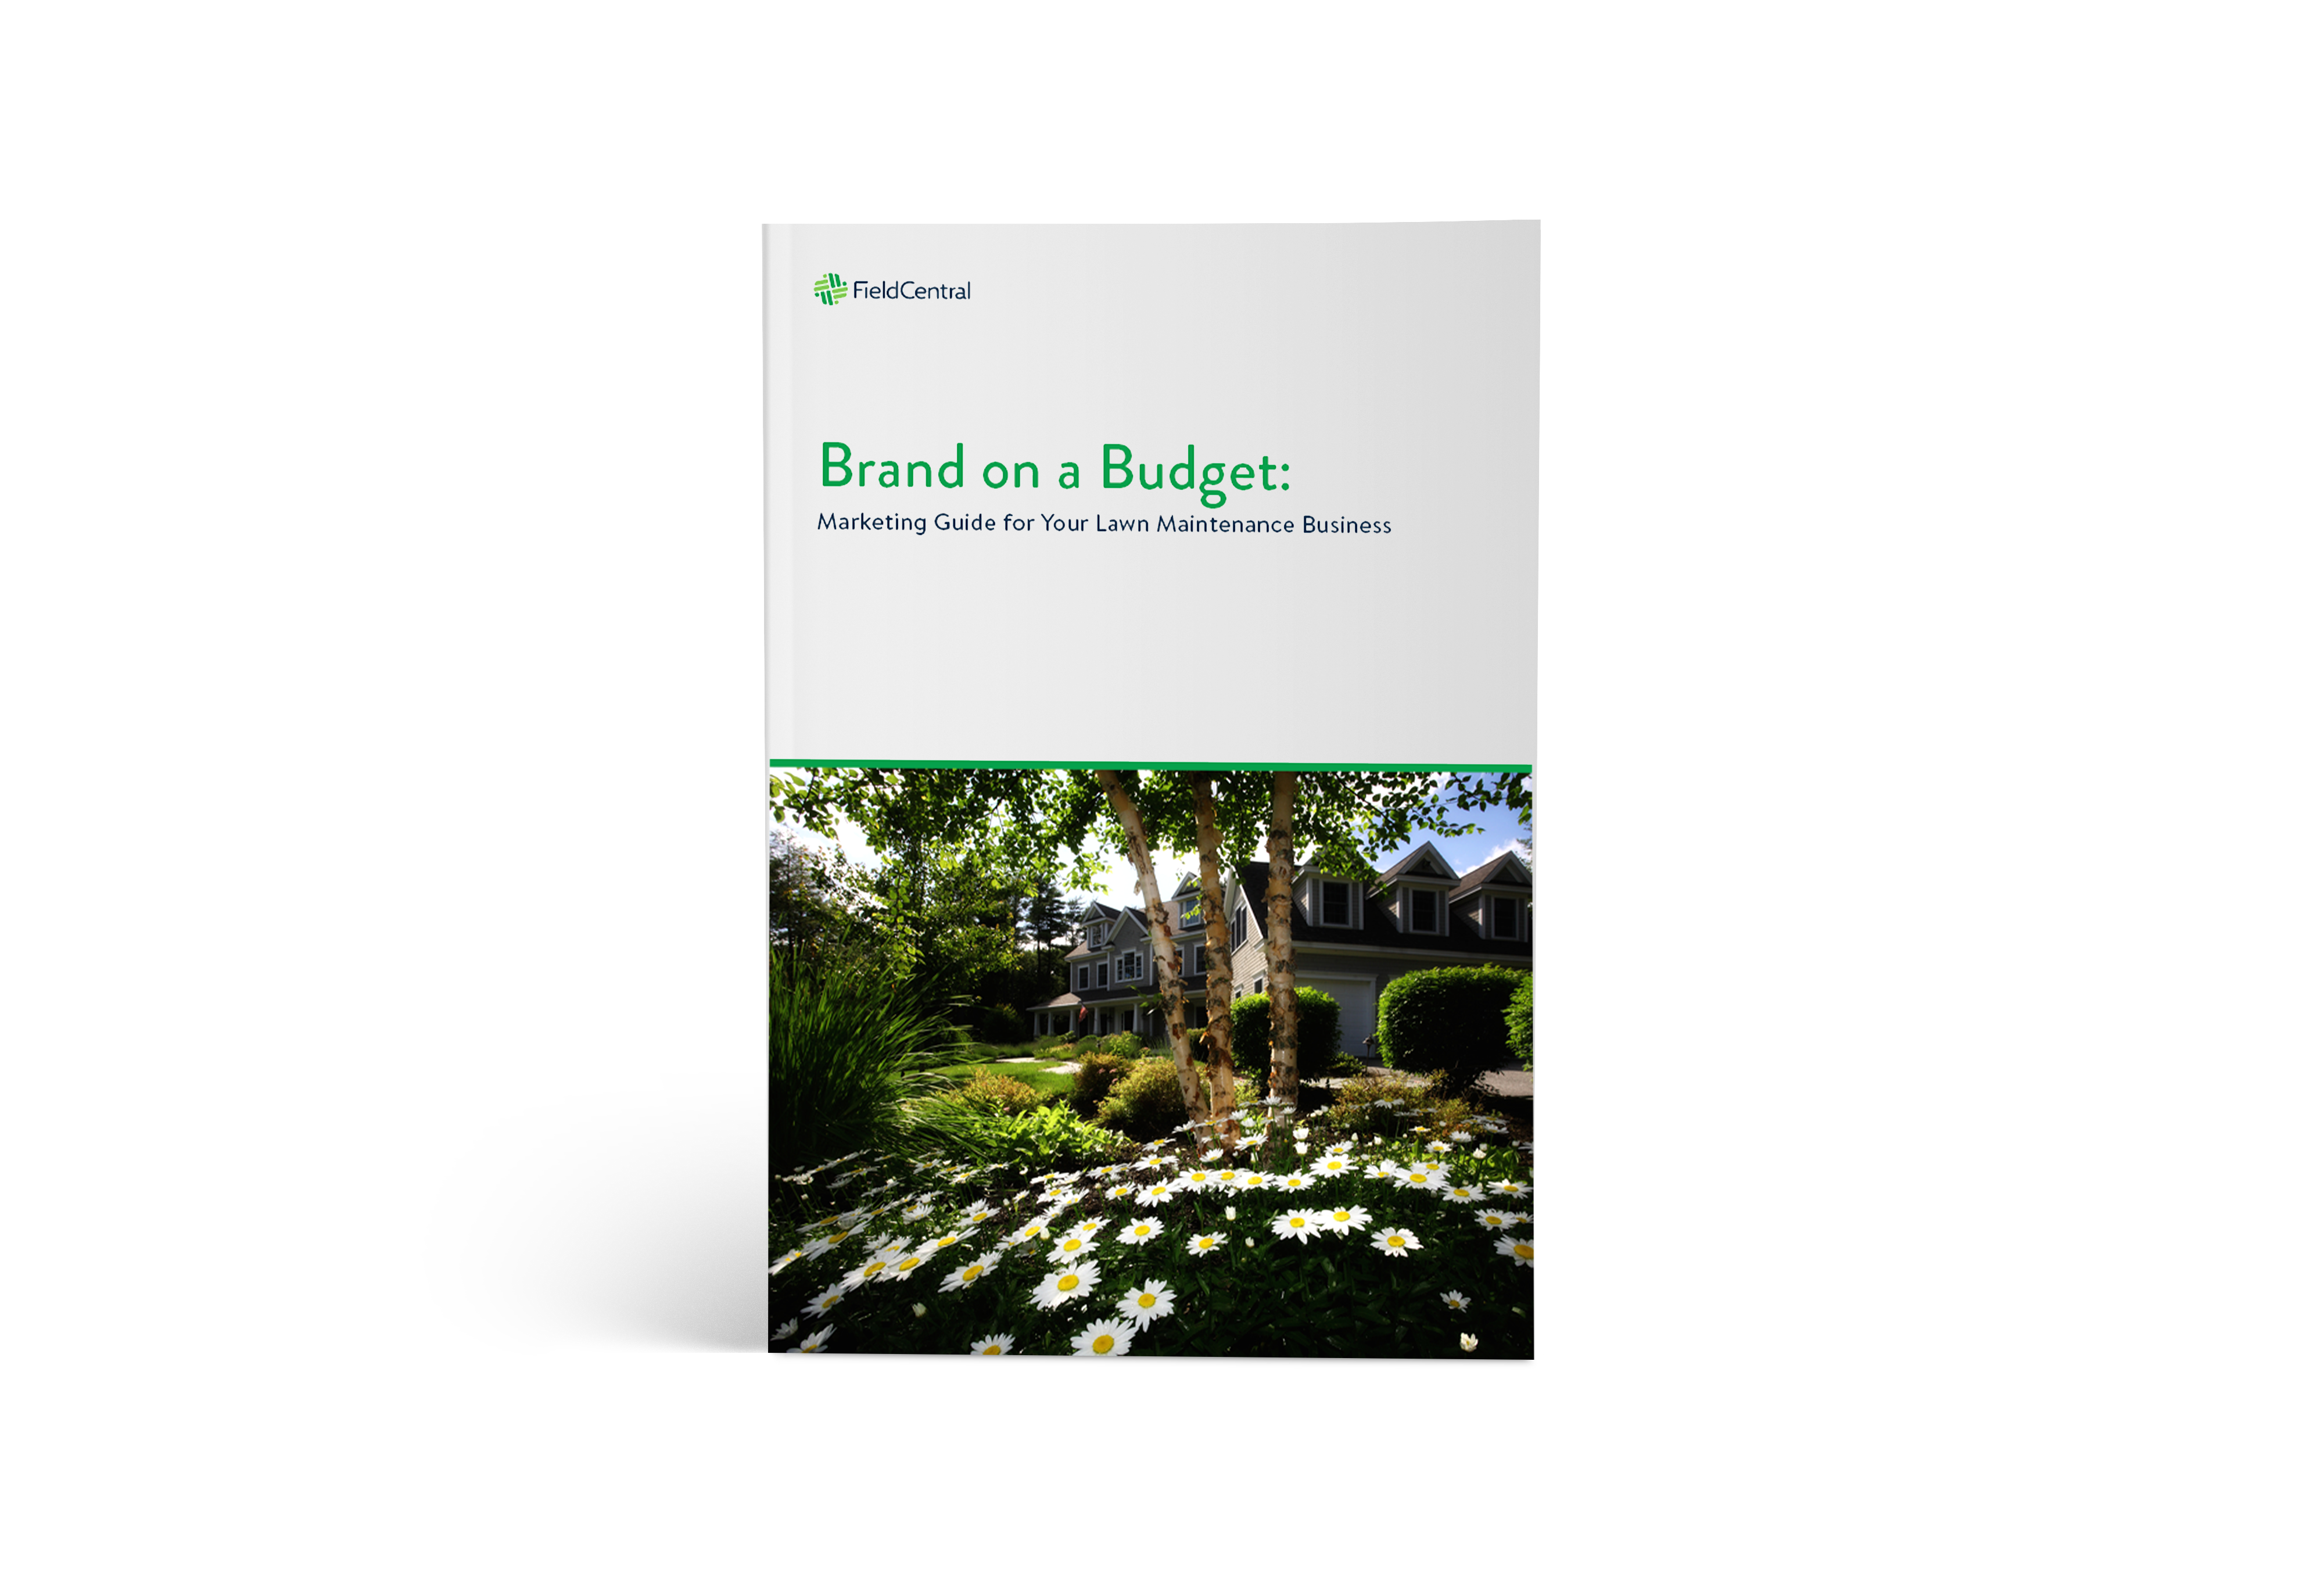 Brand on a Budget: Marketing Guide for Your Lawn Maintenance Business ebook cover.